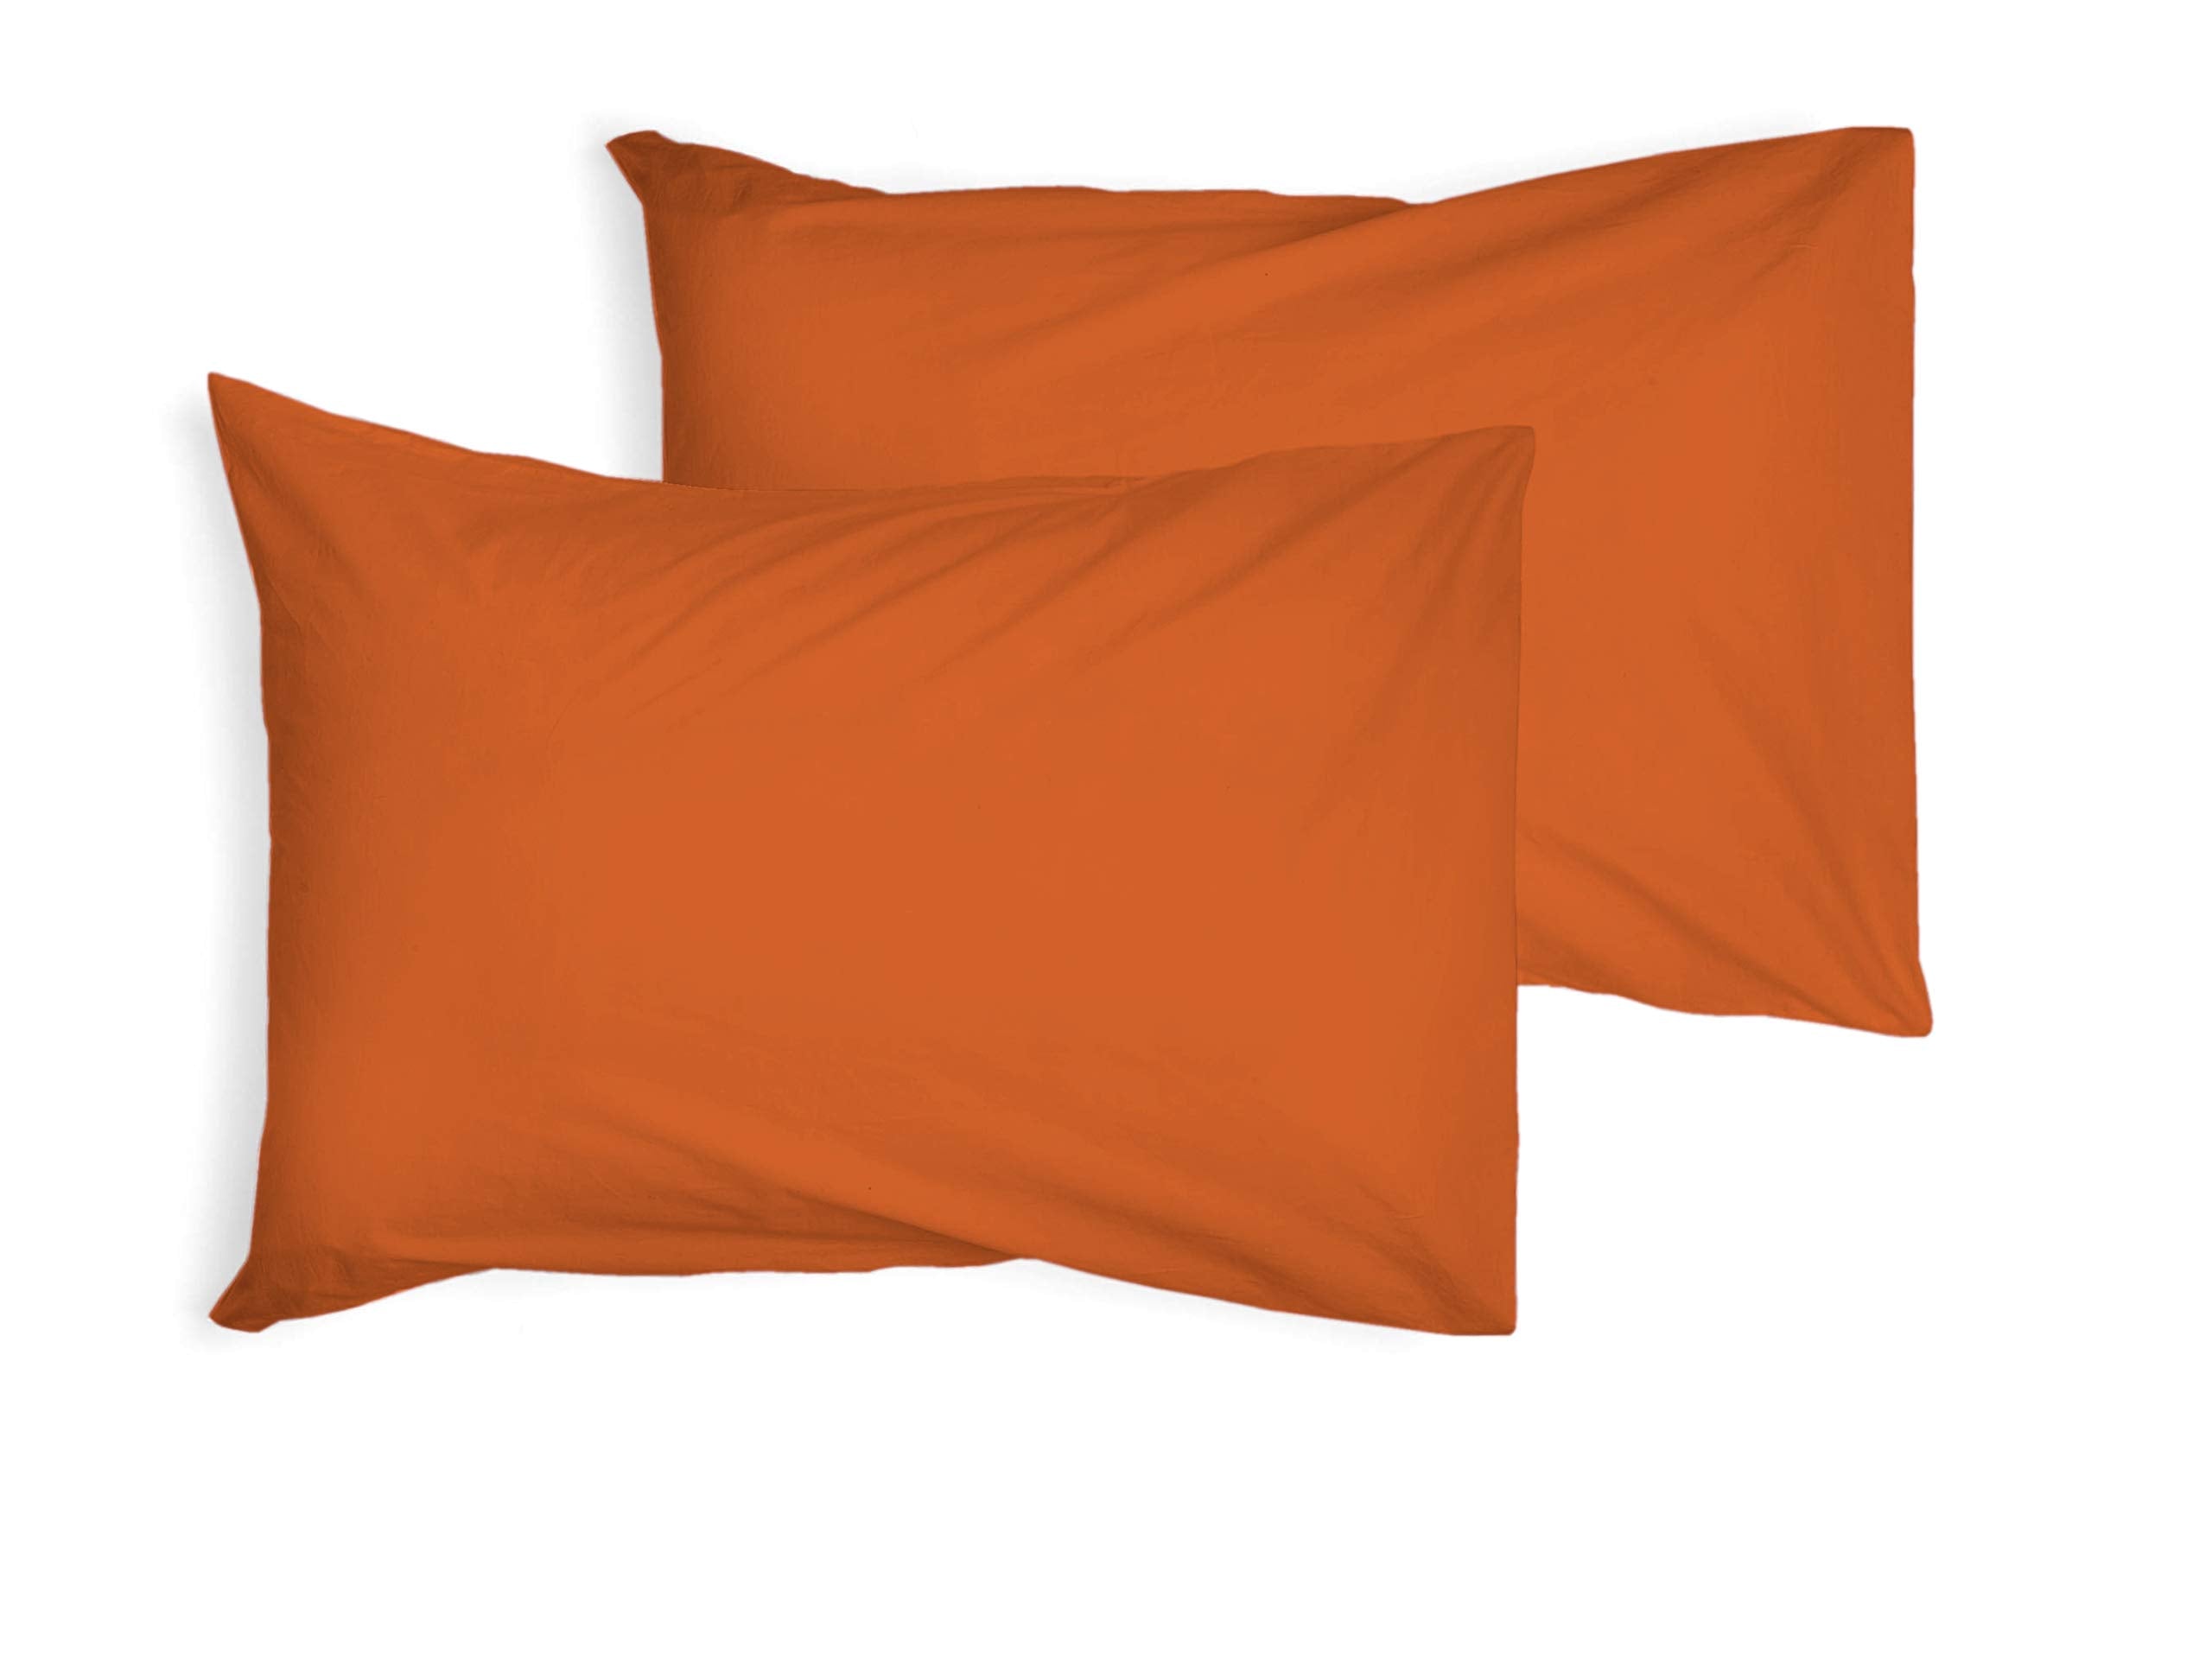 ZIMEL HOMES-Pair Of Housewife Pillow Cases, Oxford Pillow Cases 200 Thread Count Easy Care Non Iron Percale Polycotton-15 Colours (Orange, Pair of Housewife Pillow Cases)